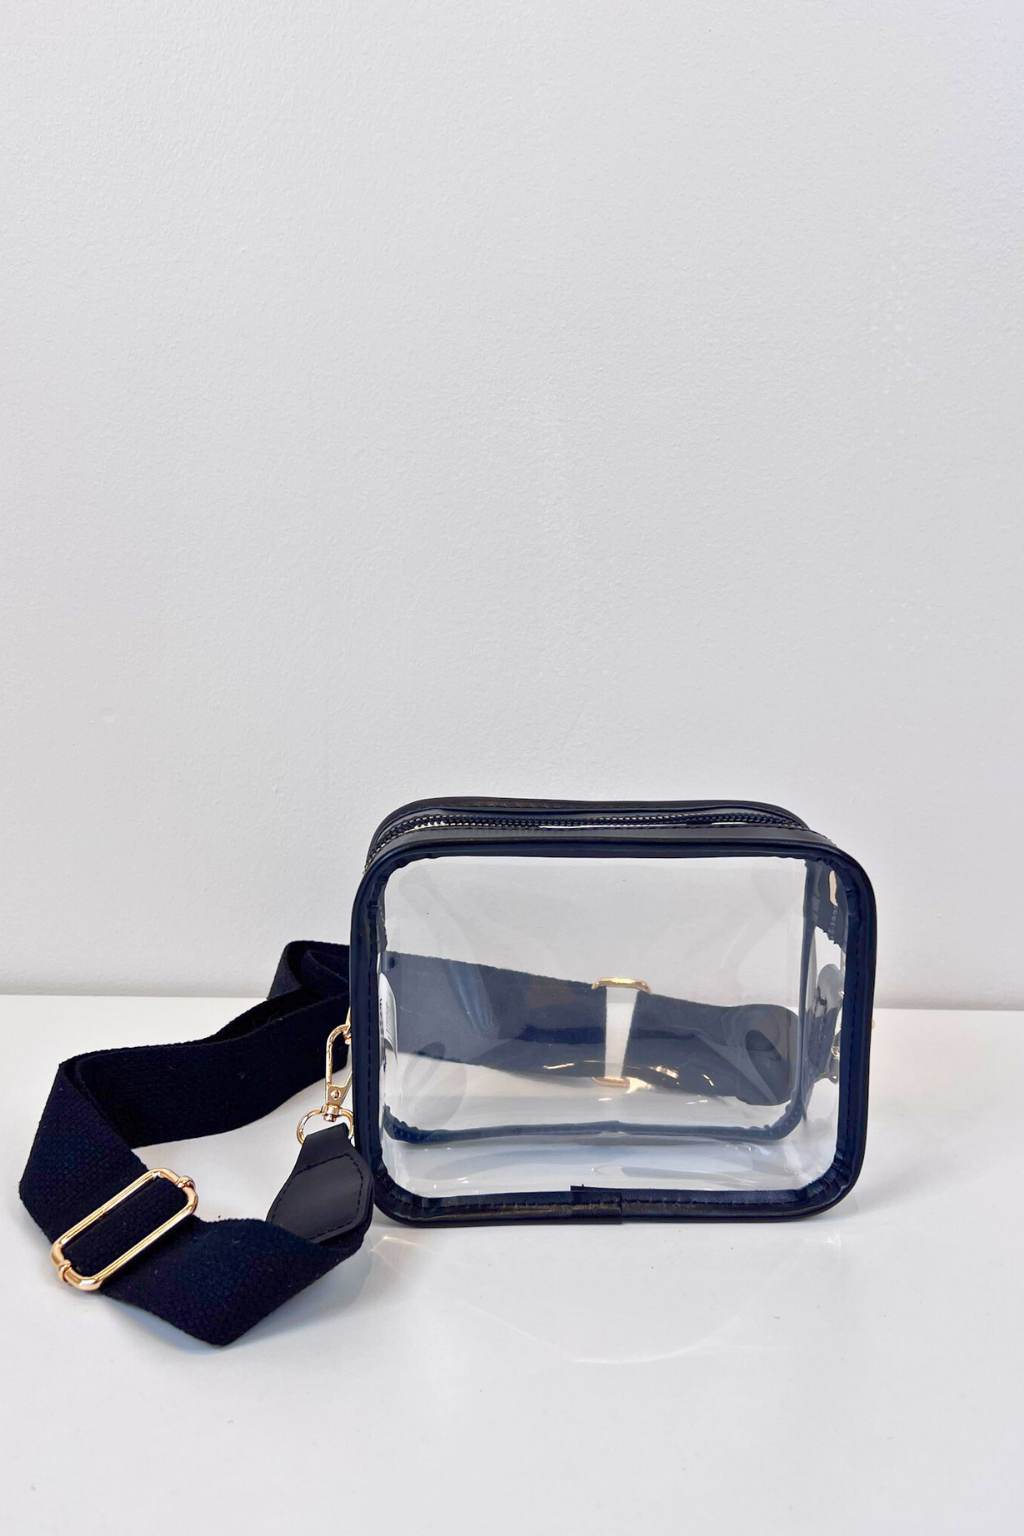 Clear Rectangular Bag with Black Trim and Strap